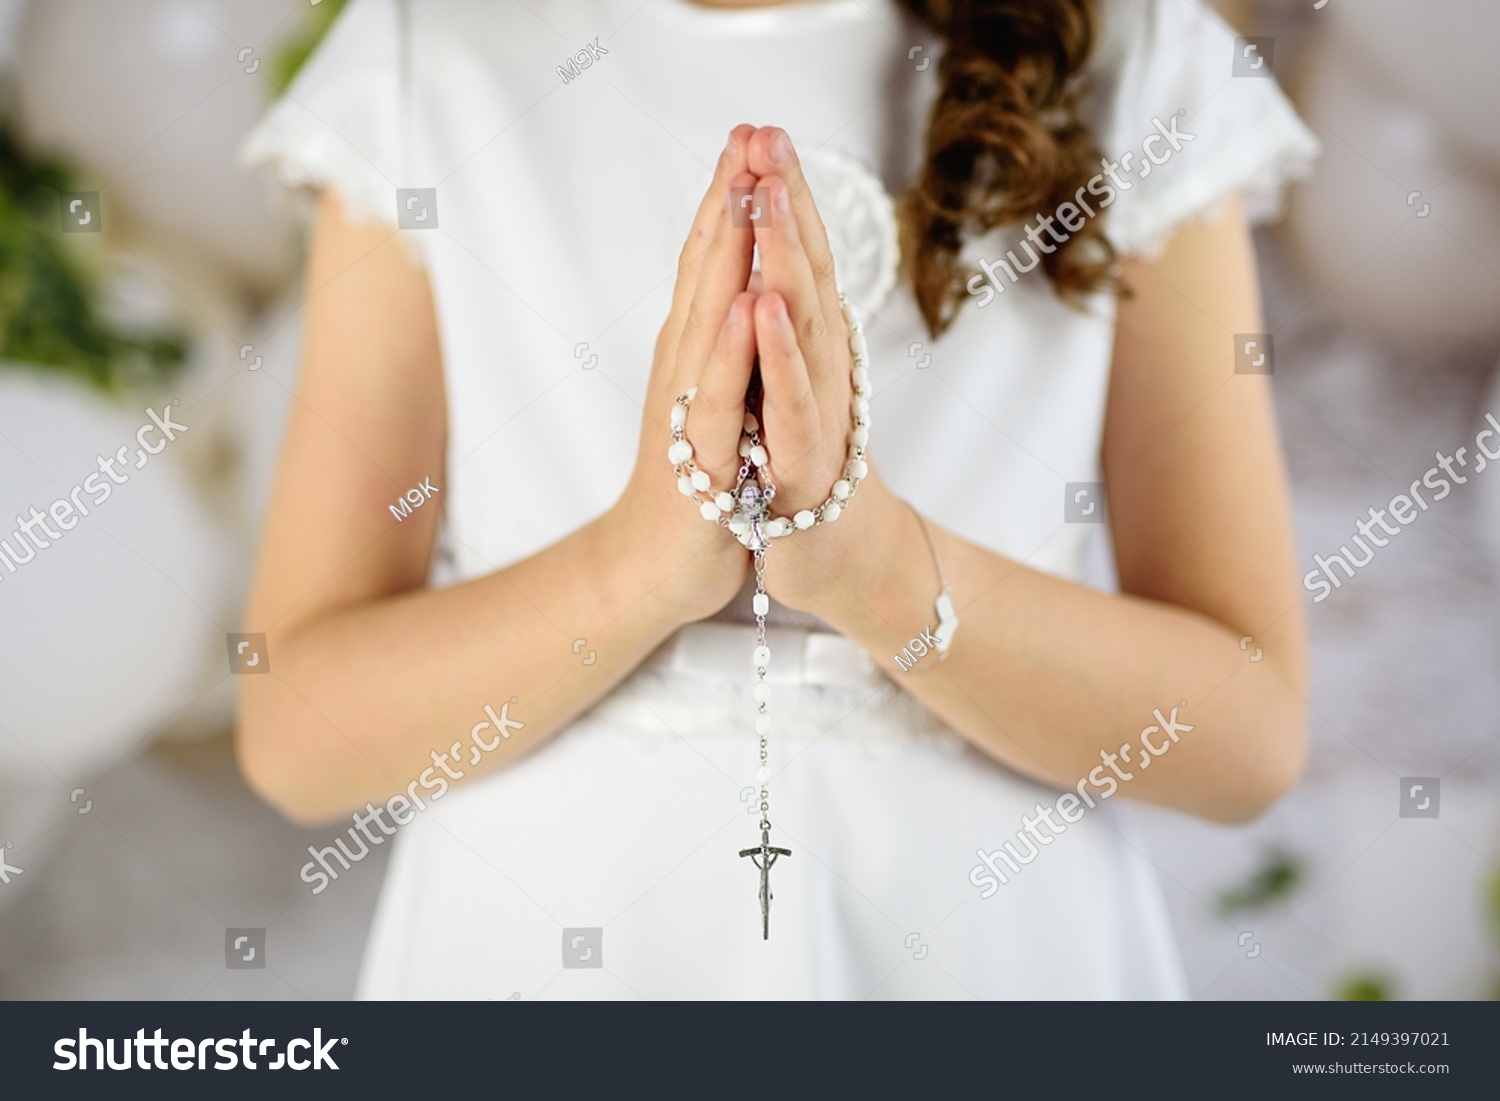 
Hands of the First Communion girl folded in prayer. First Holy Communion. A girl in a white communion dress after receiving her First Holy Communion  #2149397021